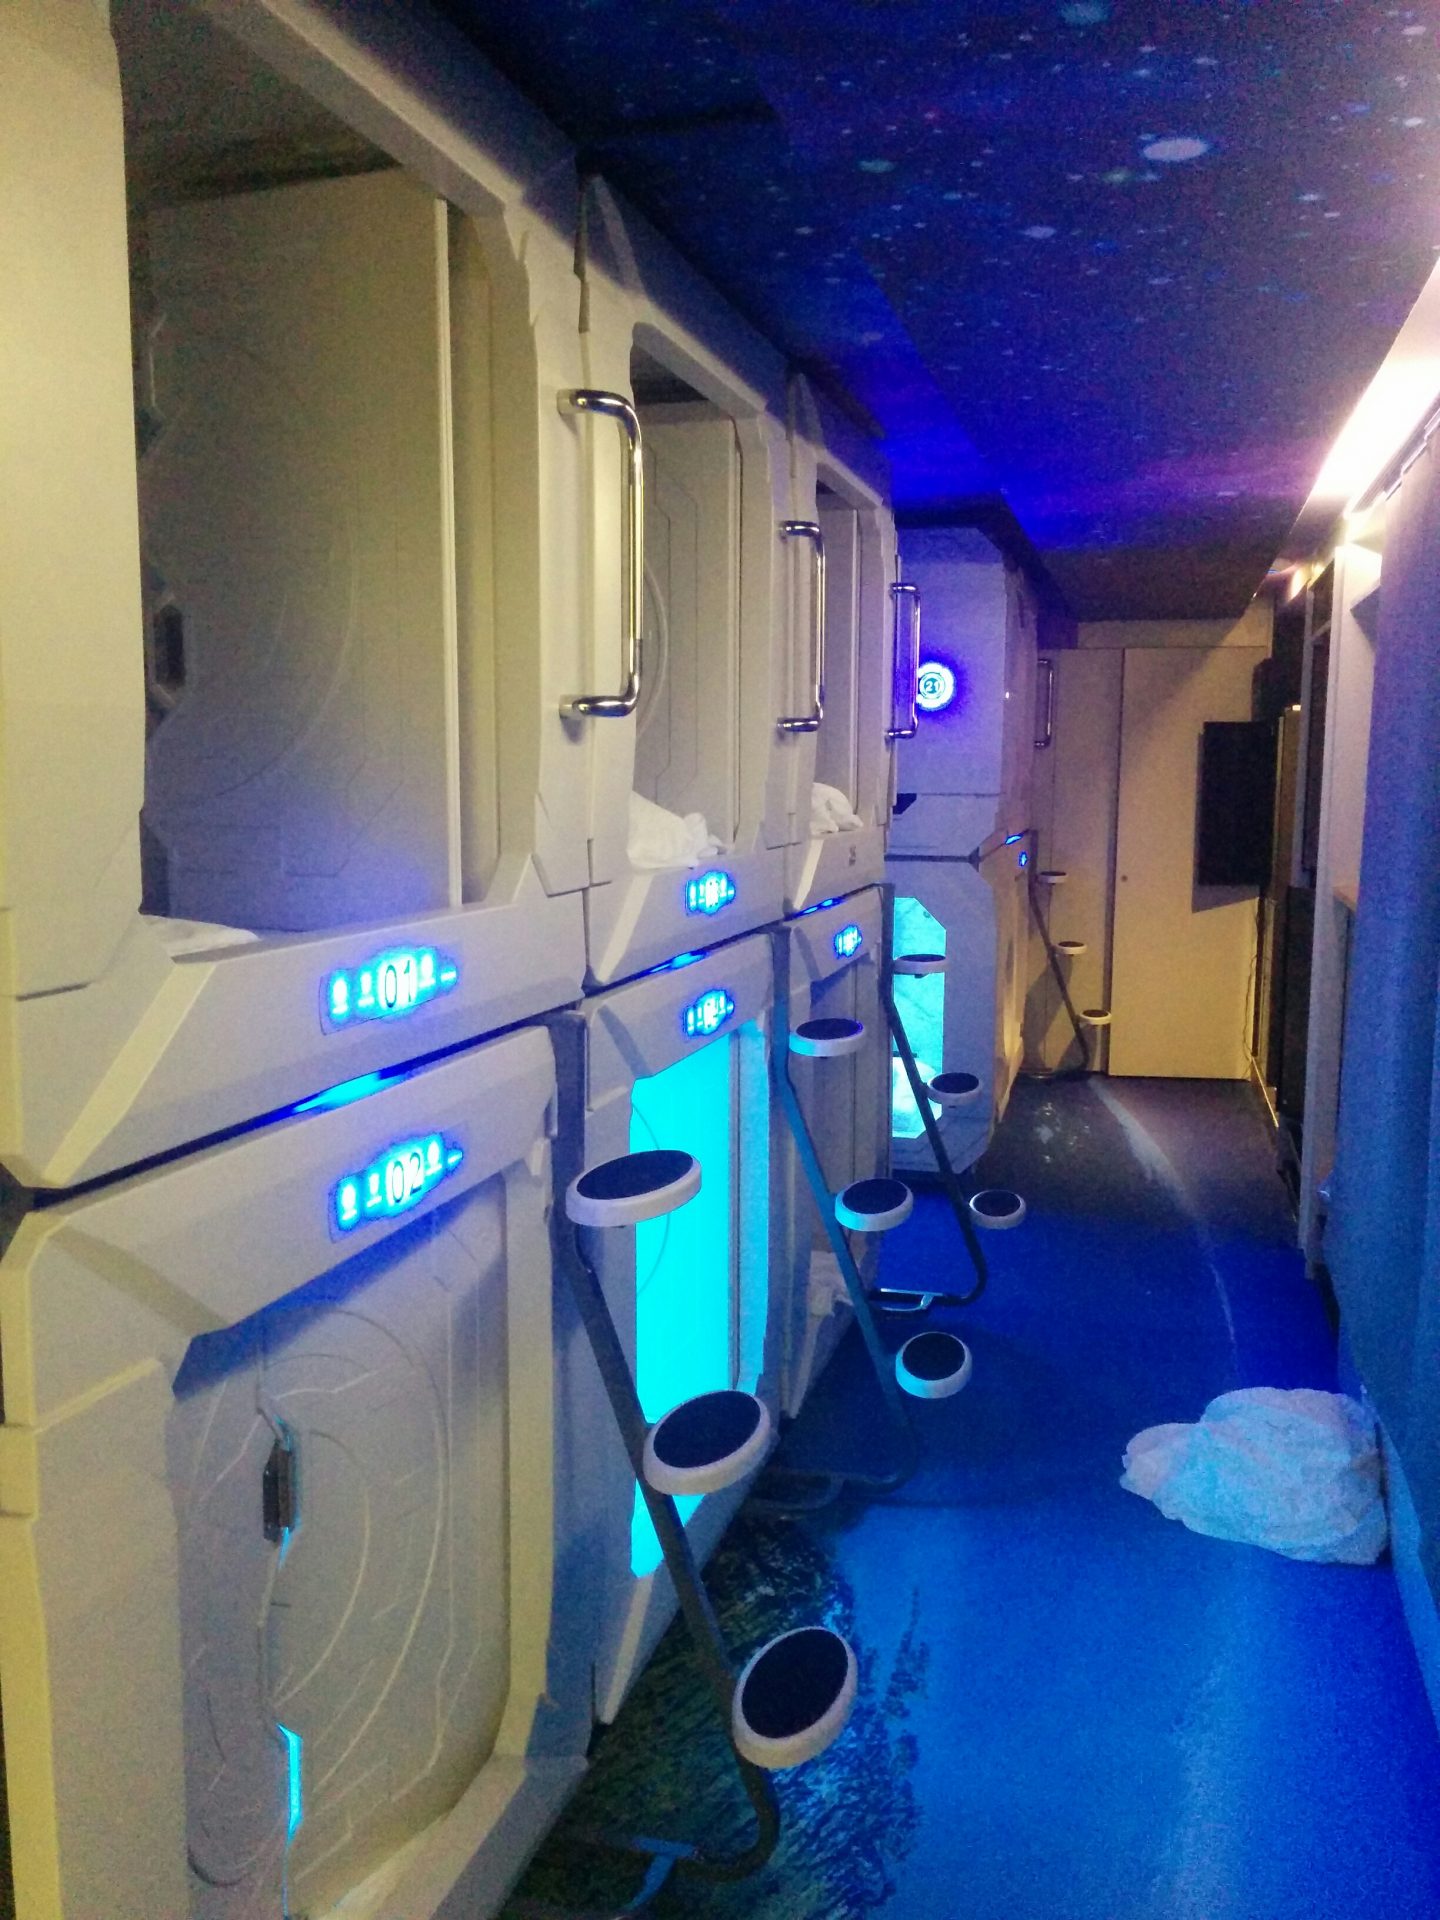 A night at Lucerne’s new capsule hotel